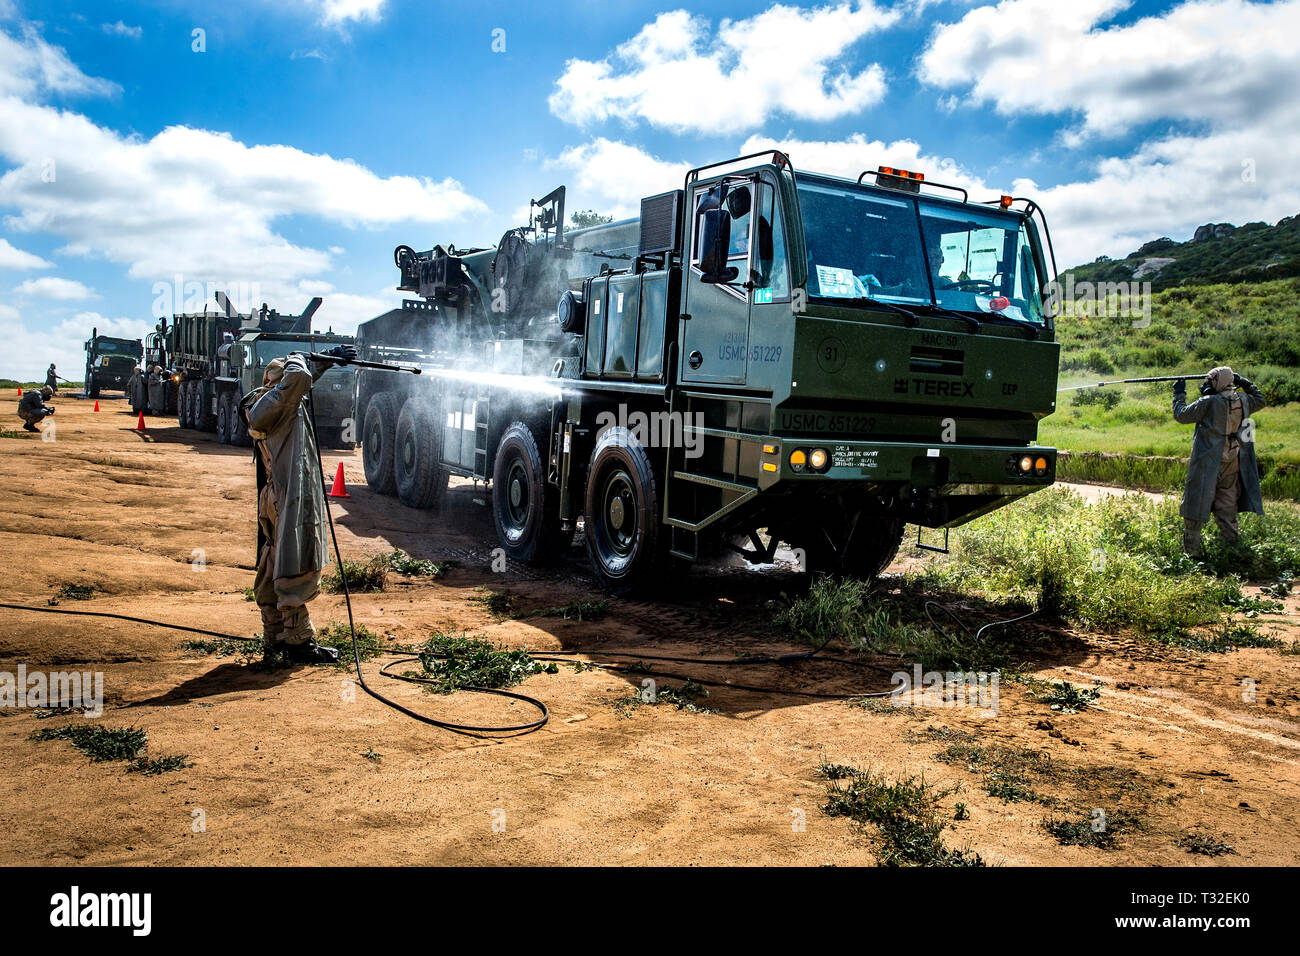 U.S. Marines with 7th Engineer Support Battalion (7th ESB), 1st Marine Logistics Group, give vehicles a final rinse during a decontamination exercise at Marine Corps Base Camp Pendleton, California, April 2, 2019. 7th ESB conducted the exercise to sharpen the Marine’s skills decontaminating tactical vehicles that are exposed to chemical, biological, radiological and nuclear contaminants. (U.S. Marine Corps photo by Lance Cpl. Betzabeth Y. Galvan) Stock Photo